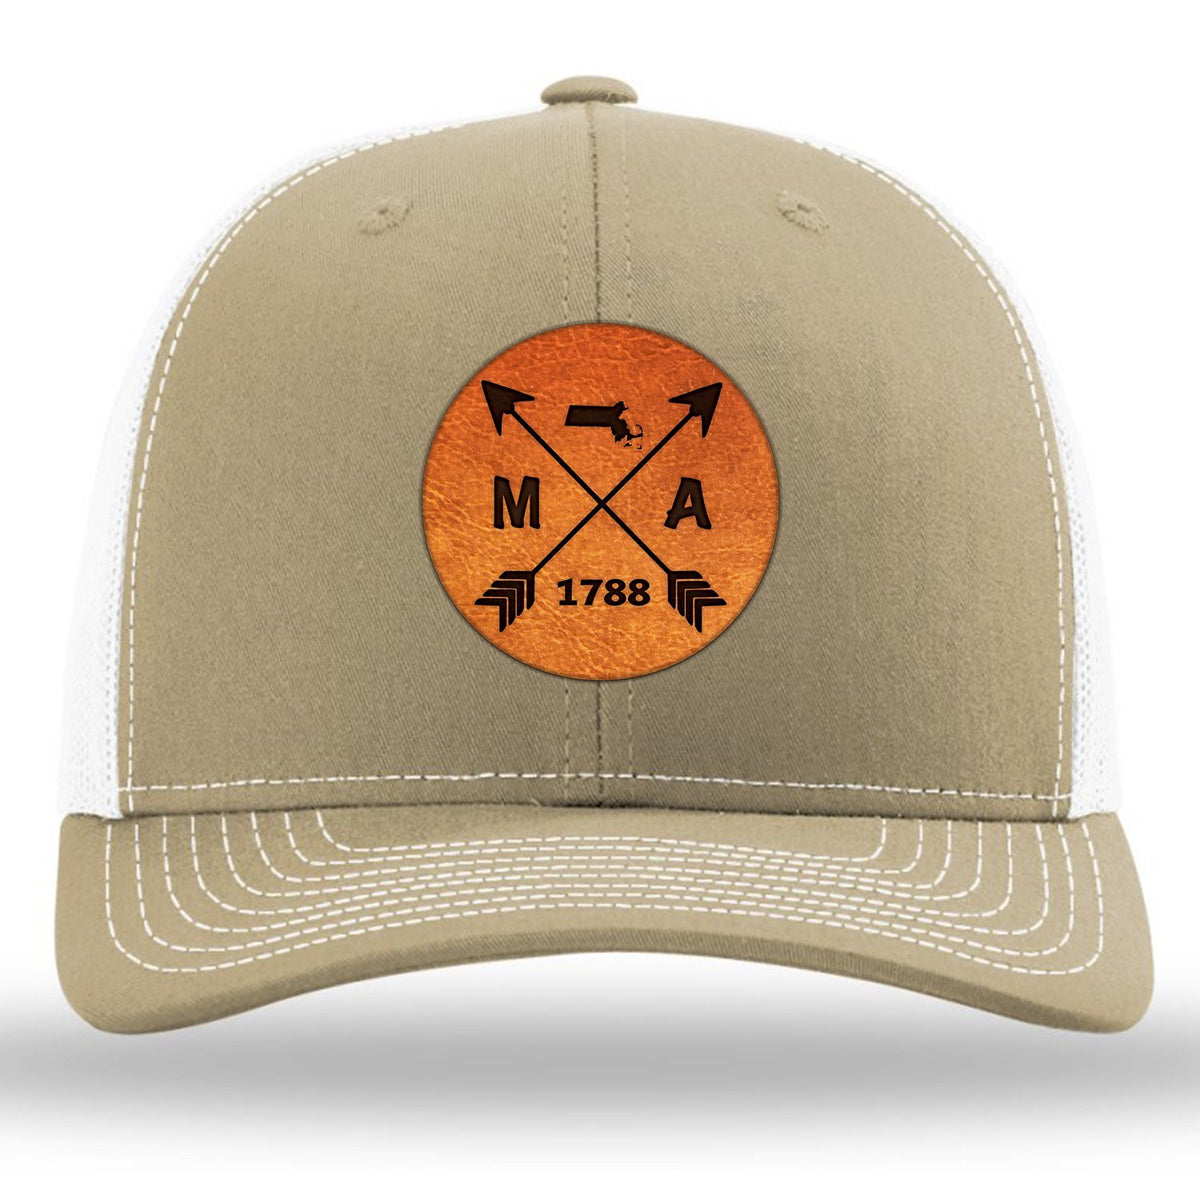 Massachusetts State Arrows - Leather Patch Trucker Hat